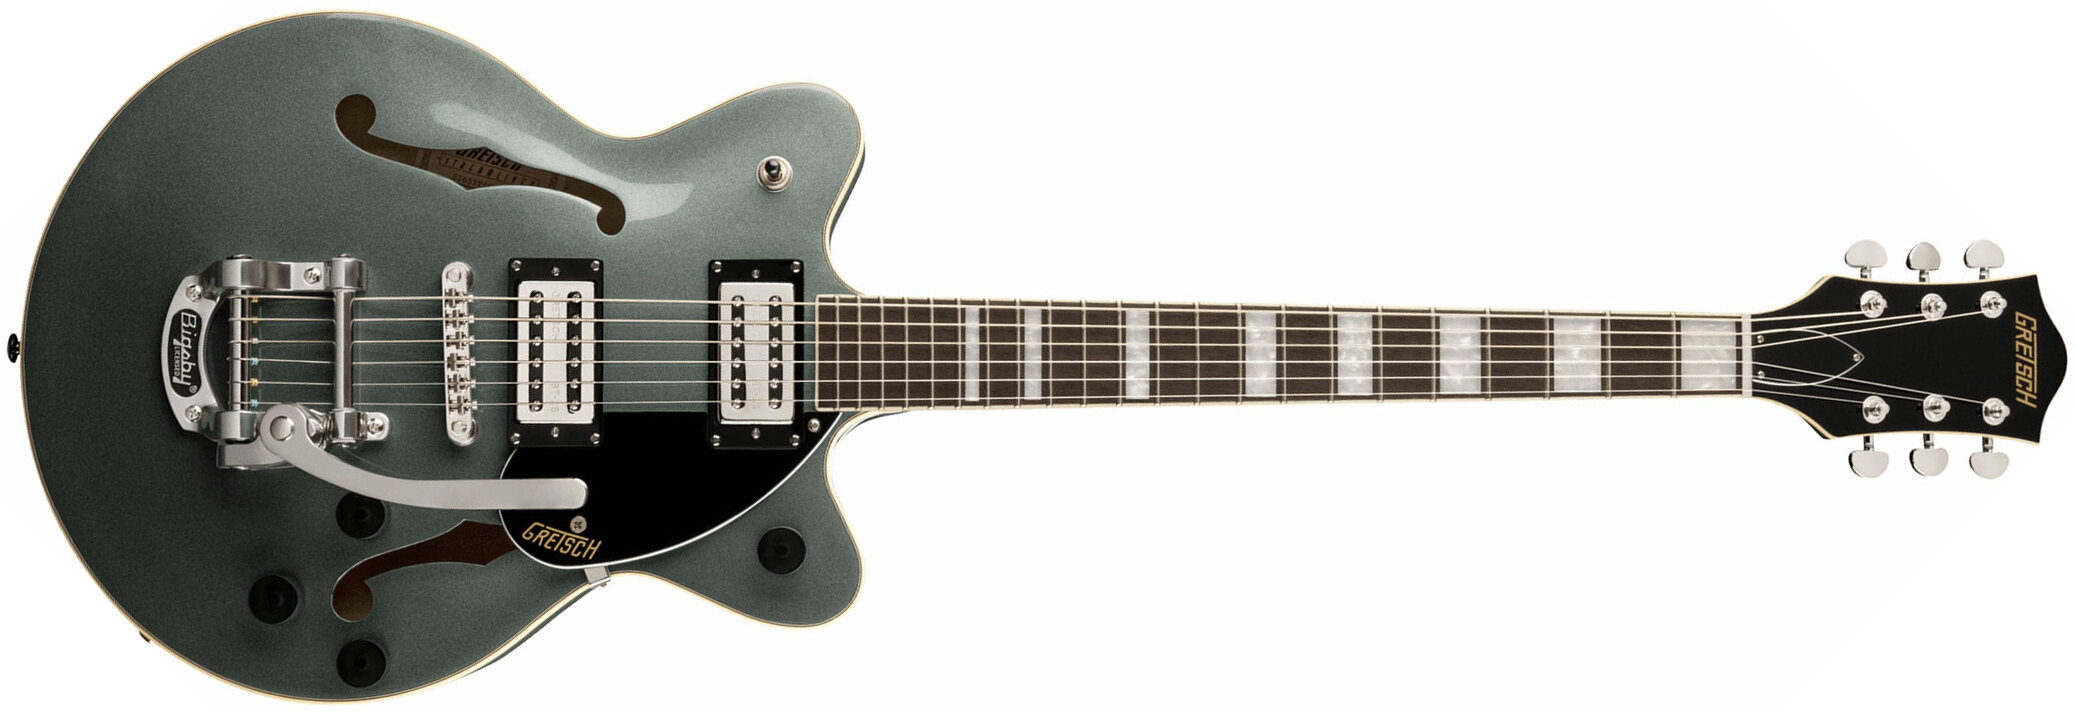 Gretsch G2655t Streamliner Center Block Jr Dc Bigsby Hh Trem Lau - Stirling Green - Double cut electric guitar - Main picture